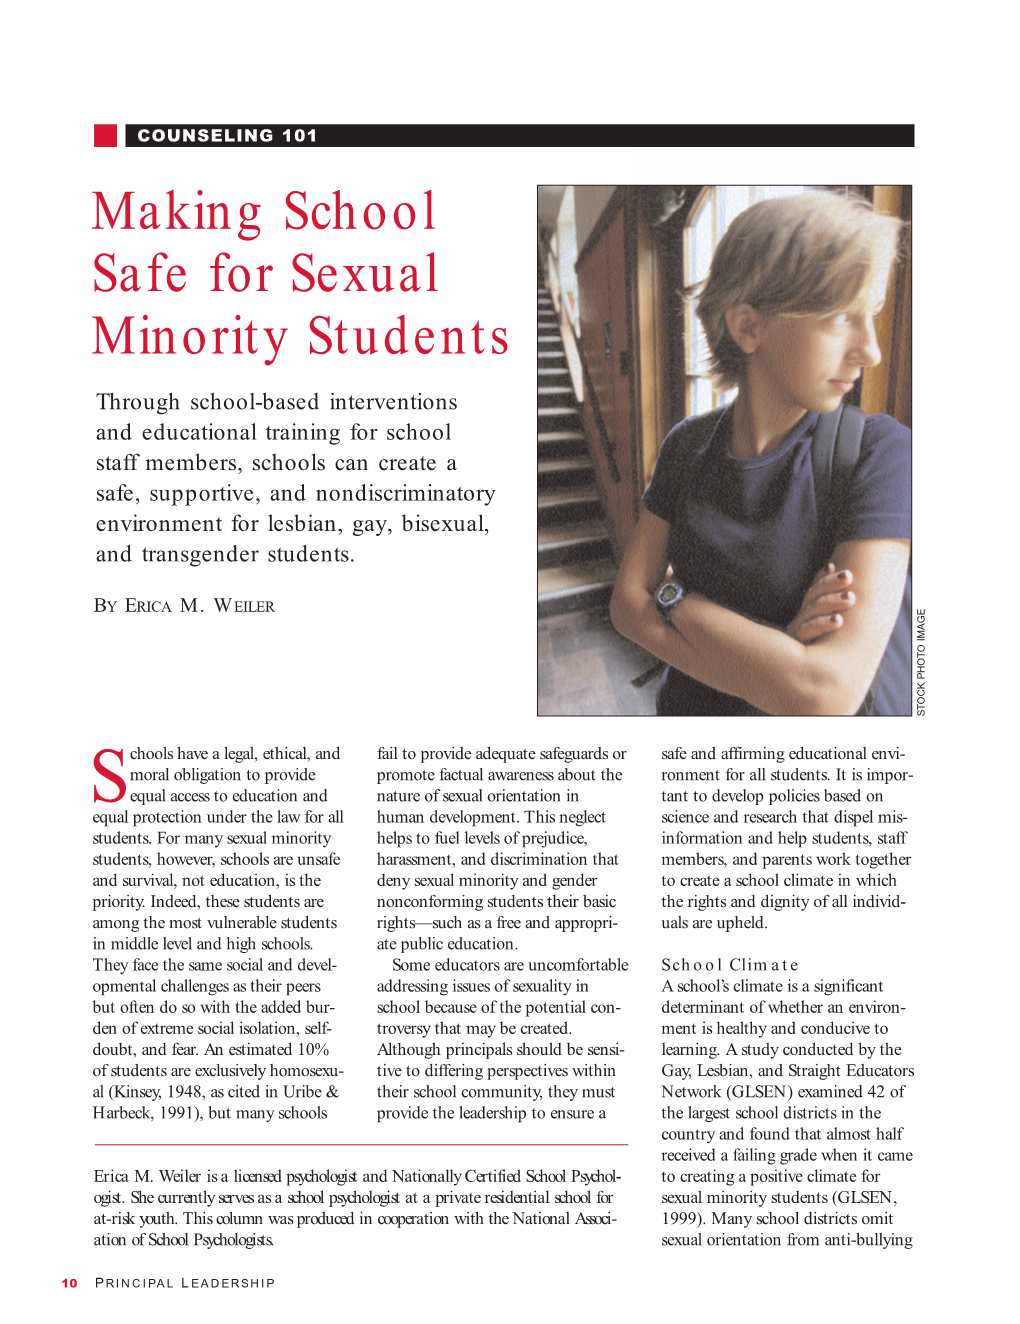 Making School Safe for Sexual Minority Students